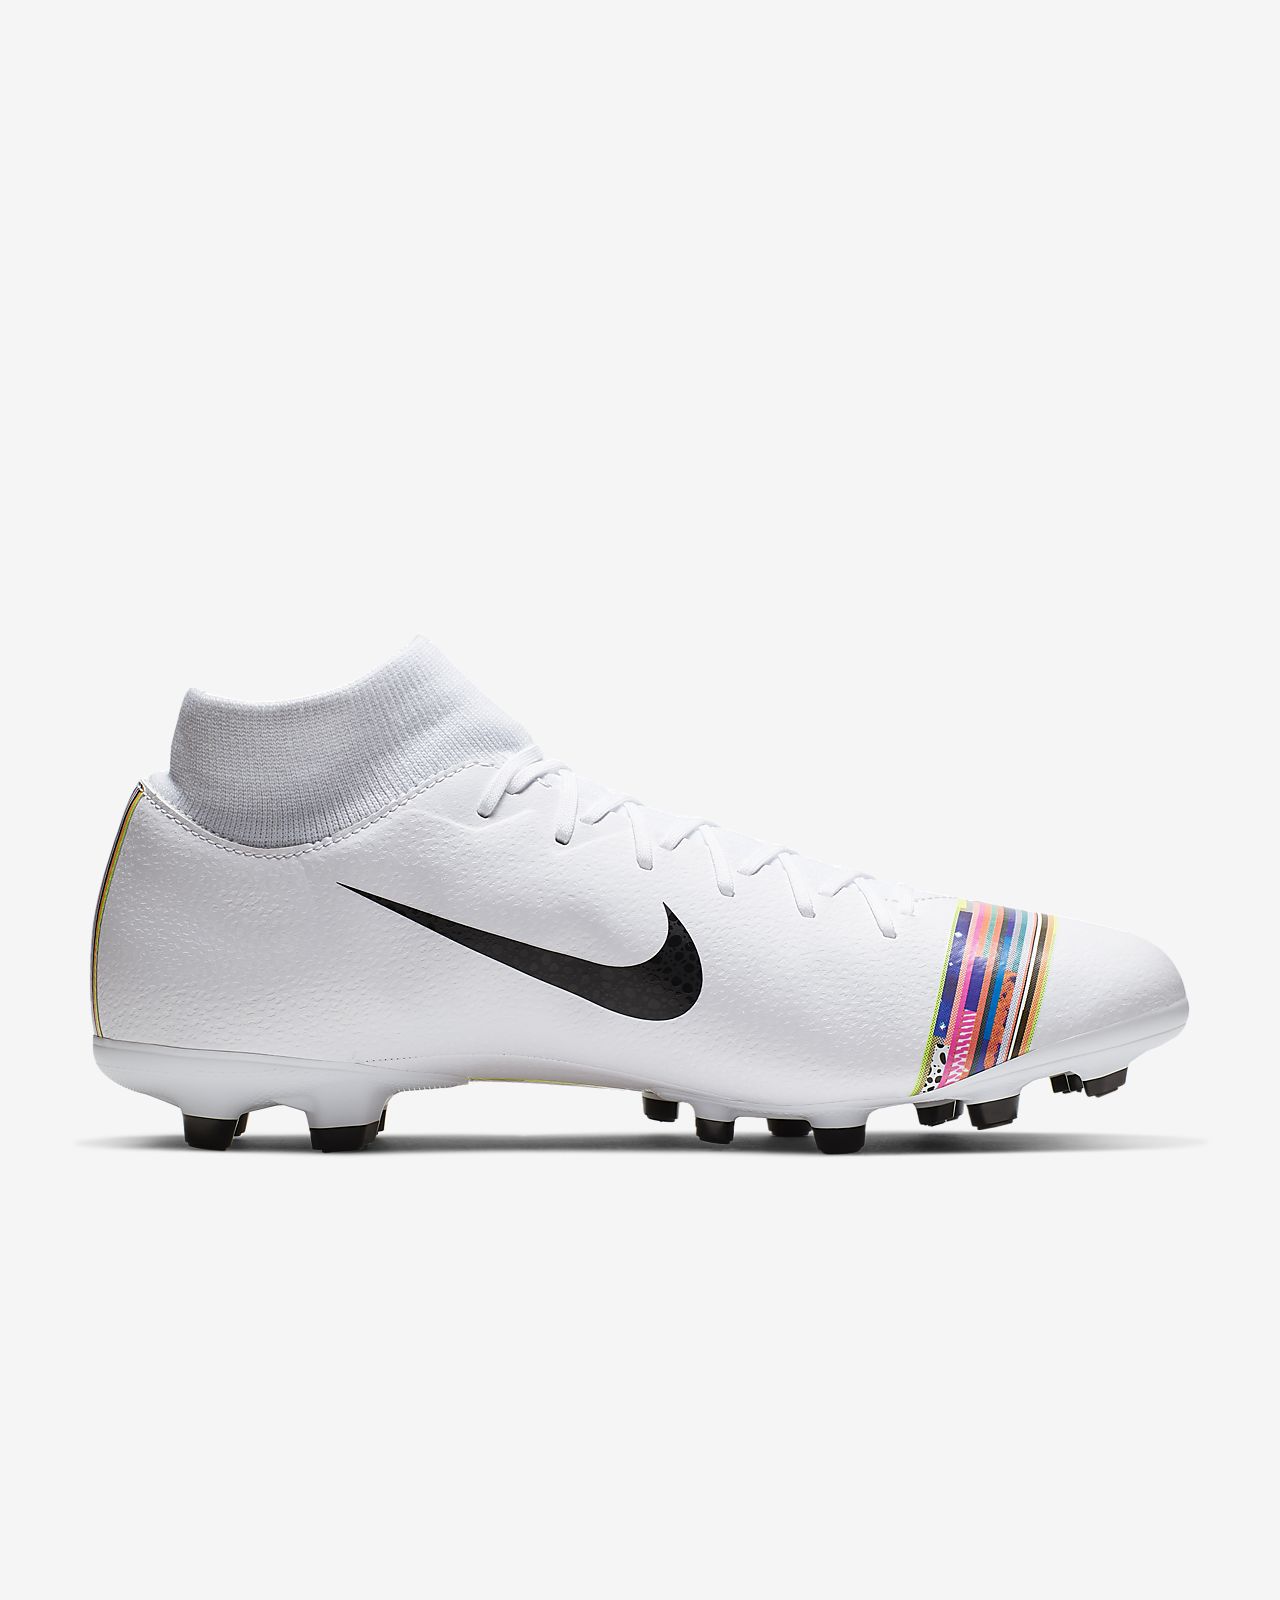 Nike Mercurial Superfly 6 Elite SG PRO ACC Soccer Cleats.